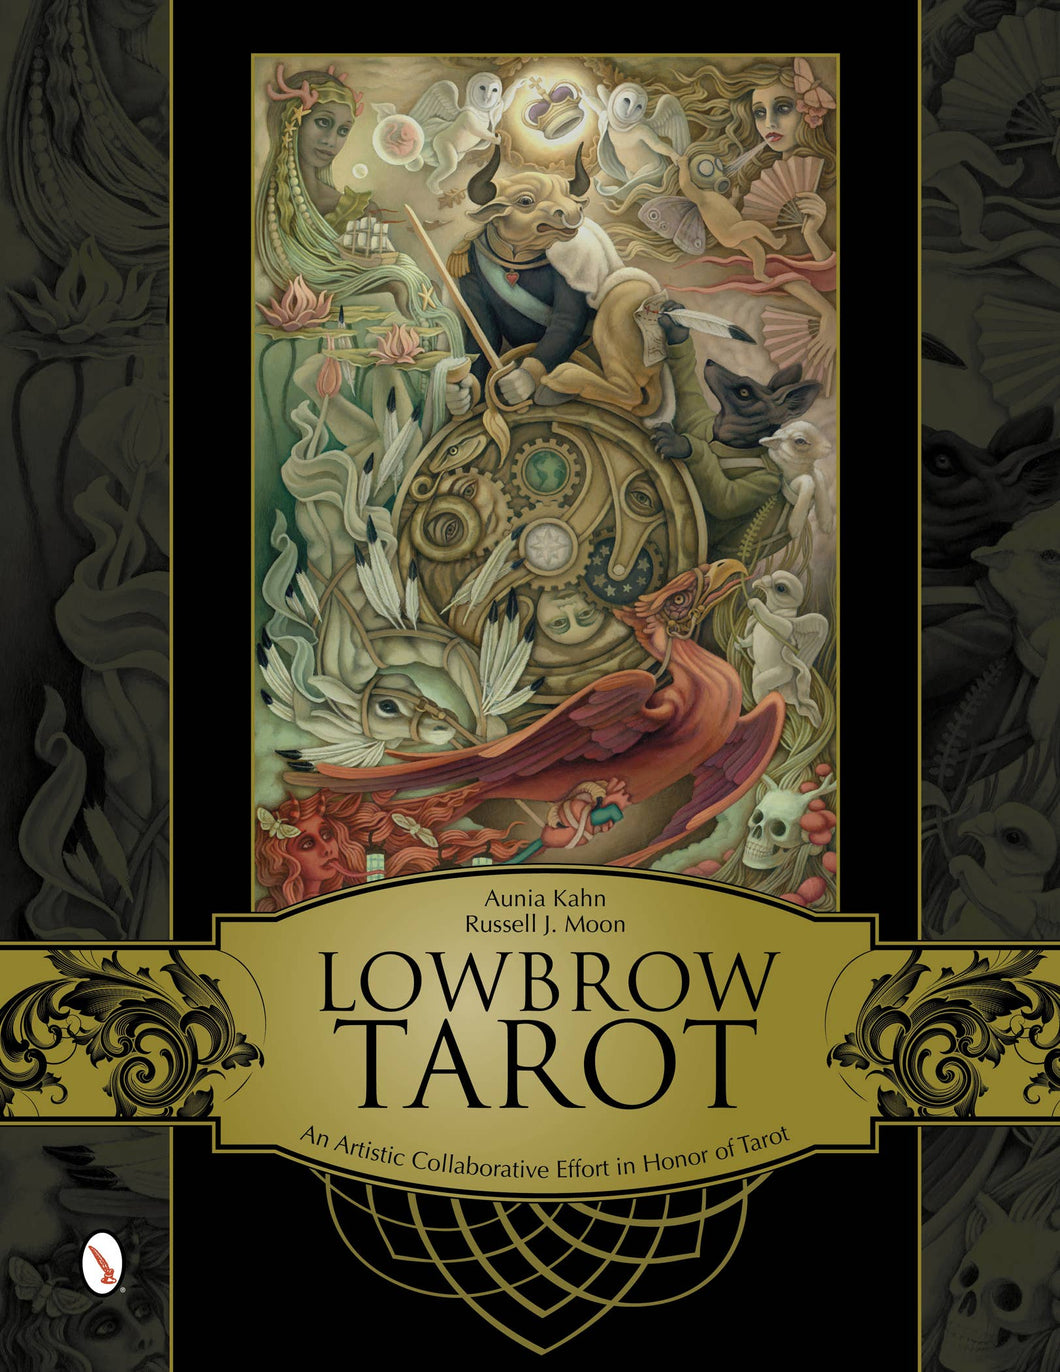 Red Feather - Lowbrow Tarot: An Artistic Collaborative Effort